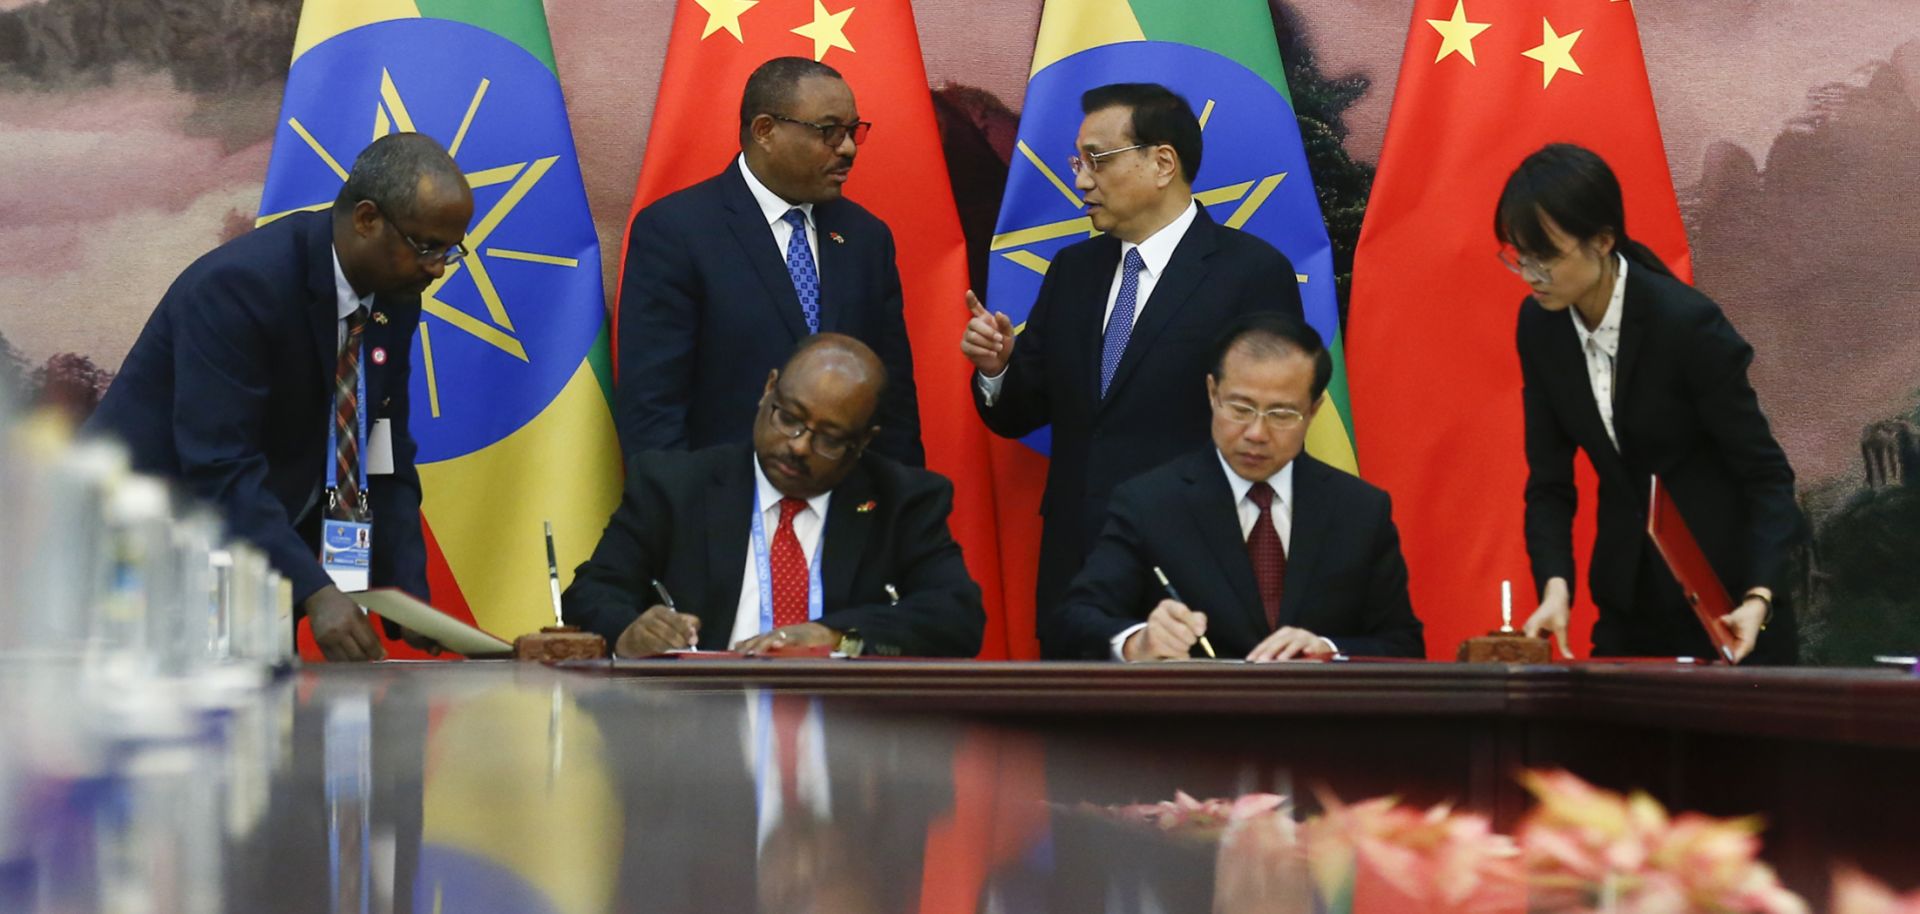 Chinese Premier Li Keqiang and then-Ethiopian Prime Minister Hailemariam Desalegn attend a signing ceremony at the Great Hall of the People in Beijing on May 12, 2017.